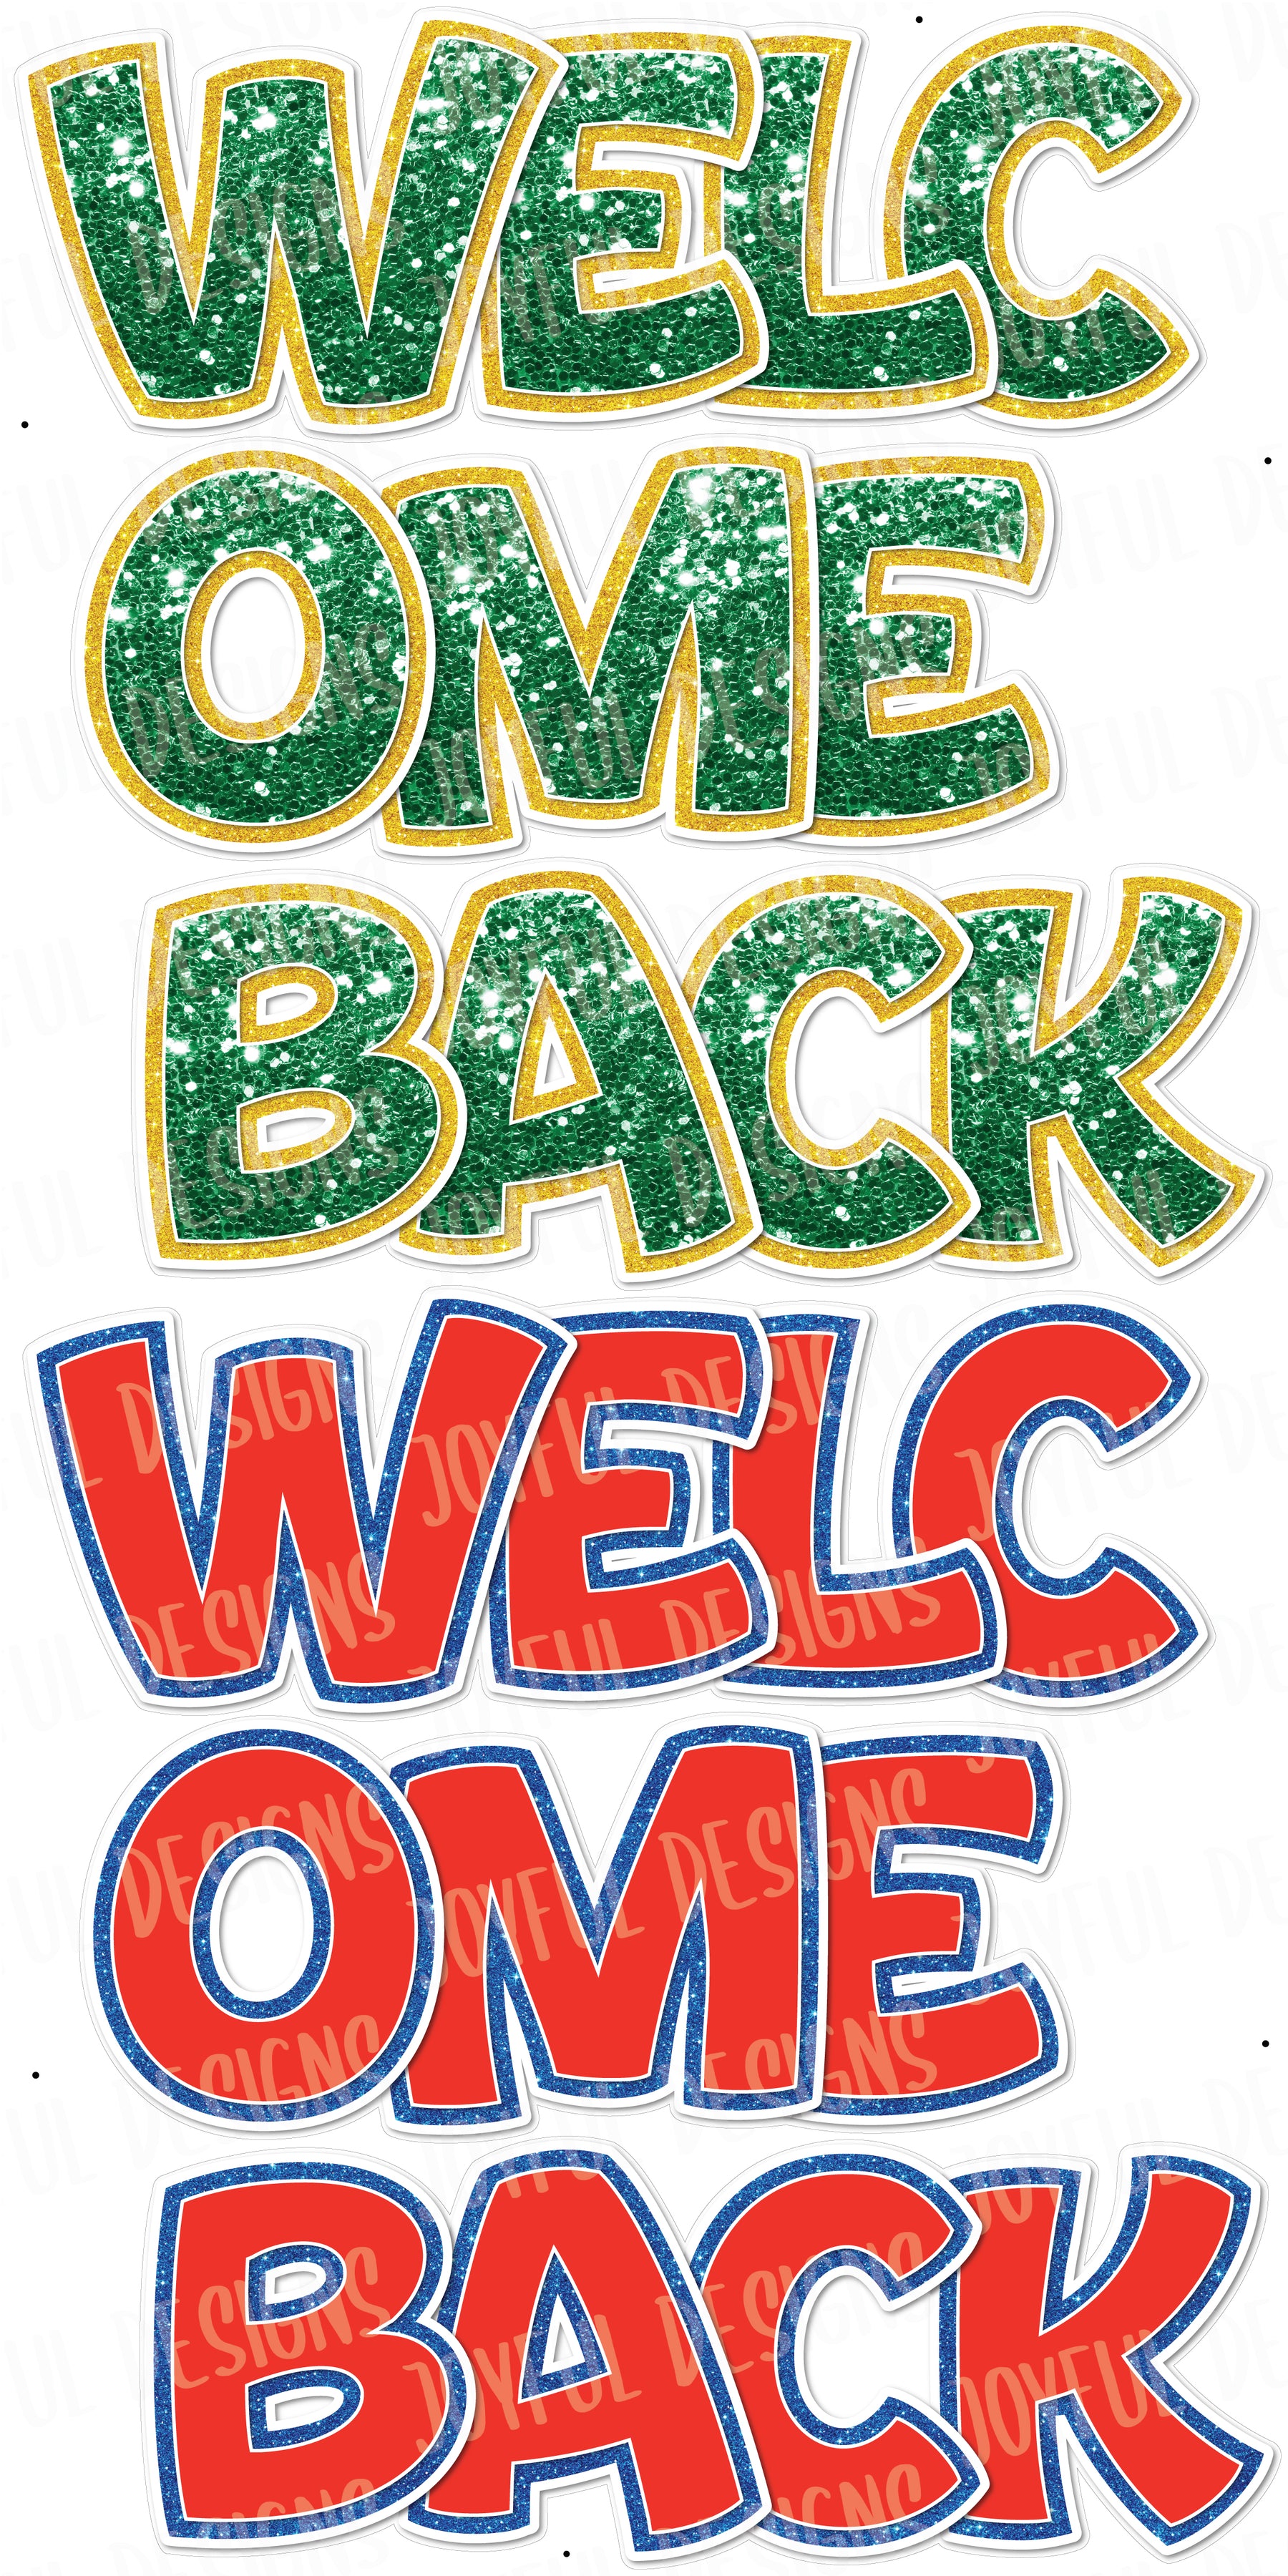 2 WELCOME BACK Quick Sets - Pick Your Fill & Border Colors!